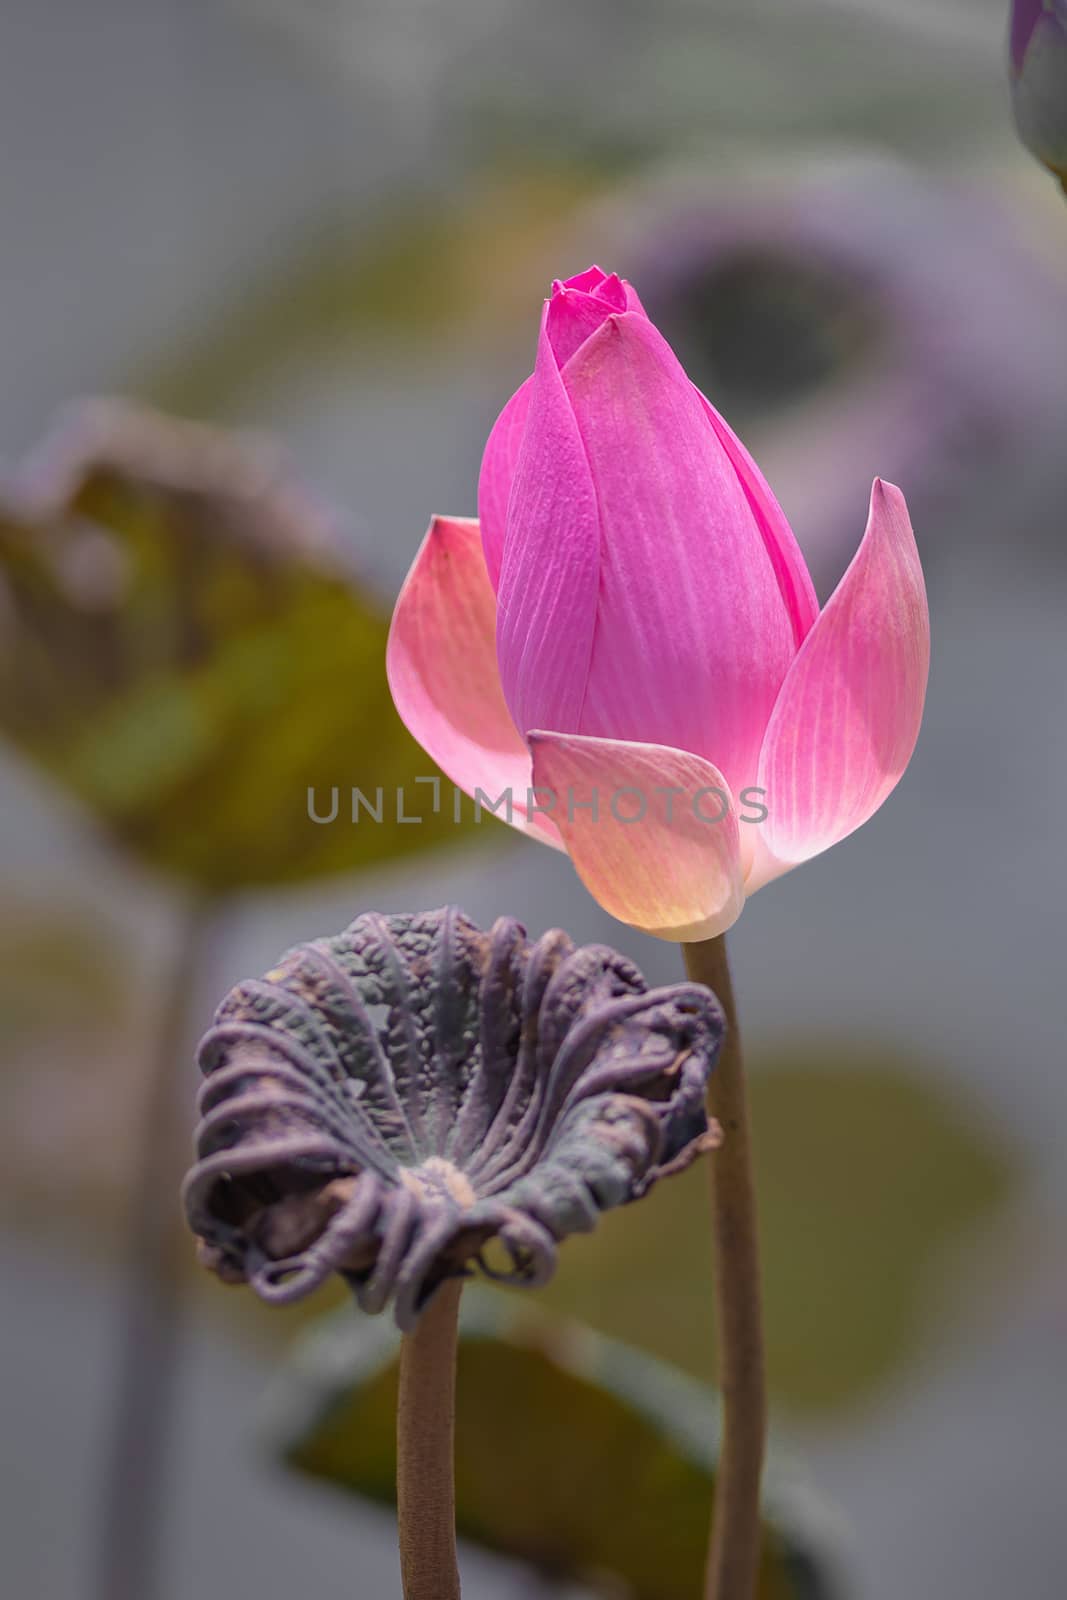 Pink Lotus flower and Lotus flower plants, selective color and focus.